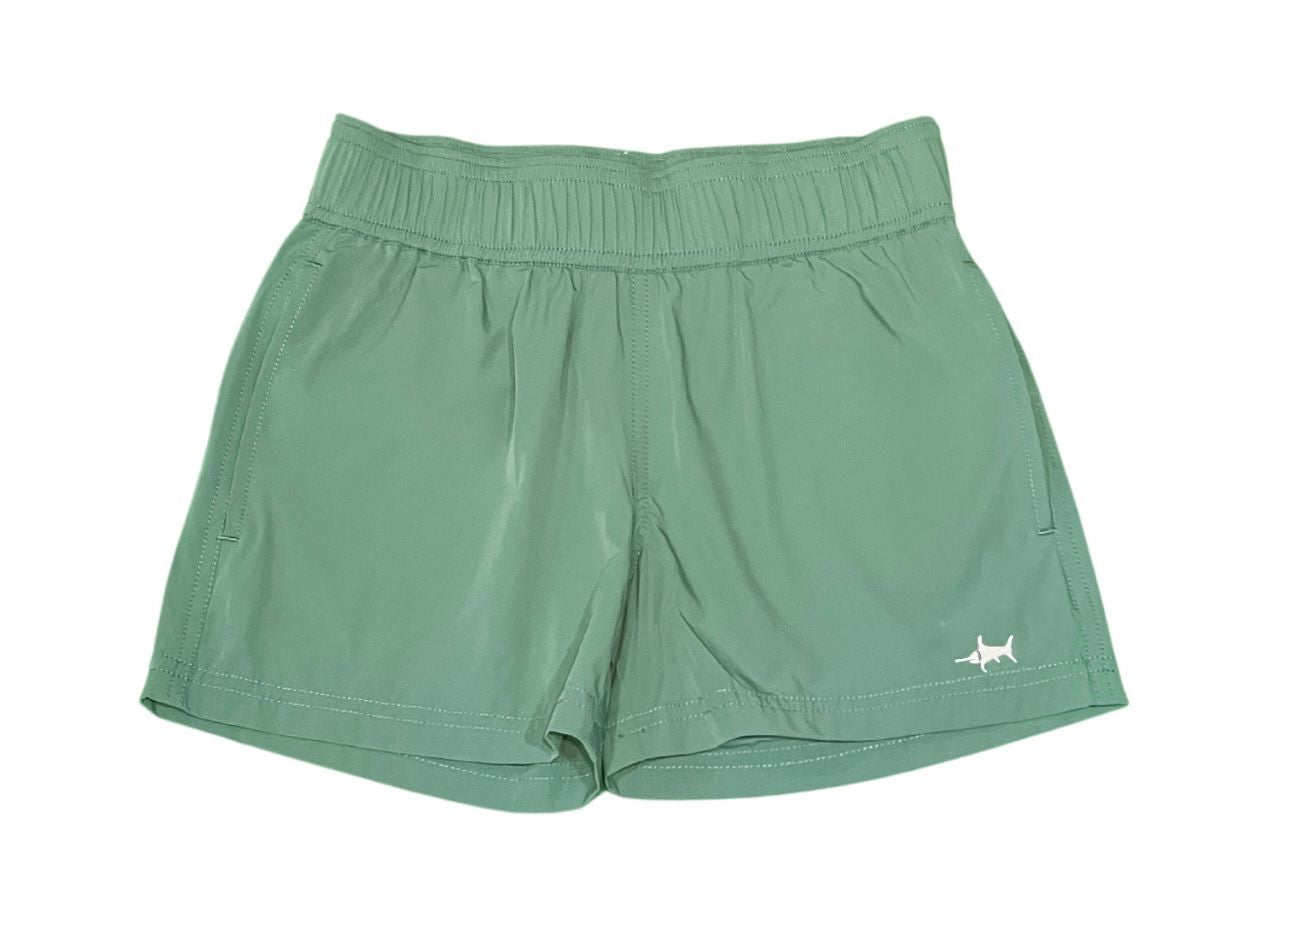 Inlet Performance Shorts - 6043-47